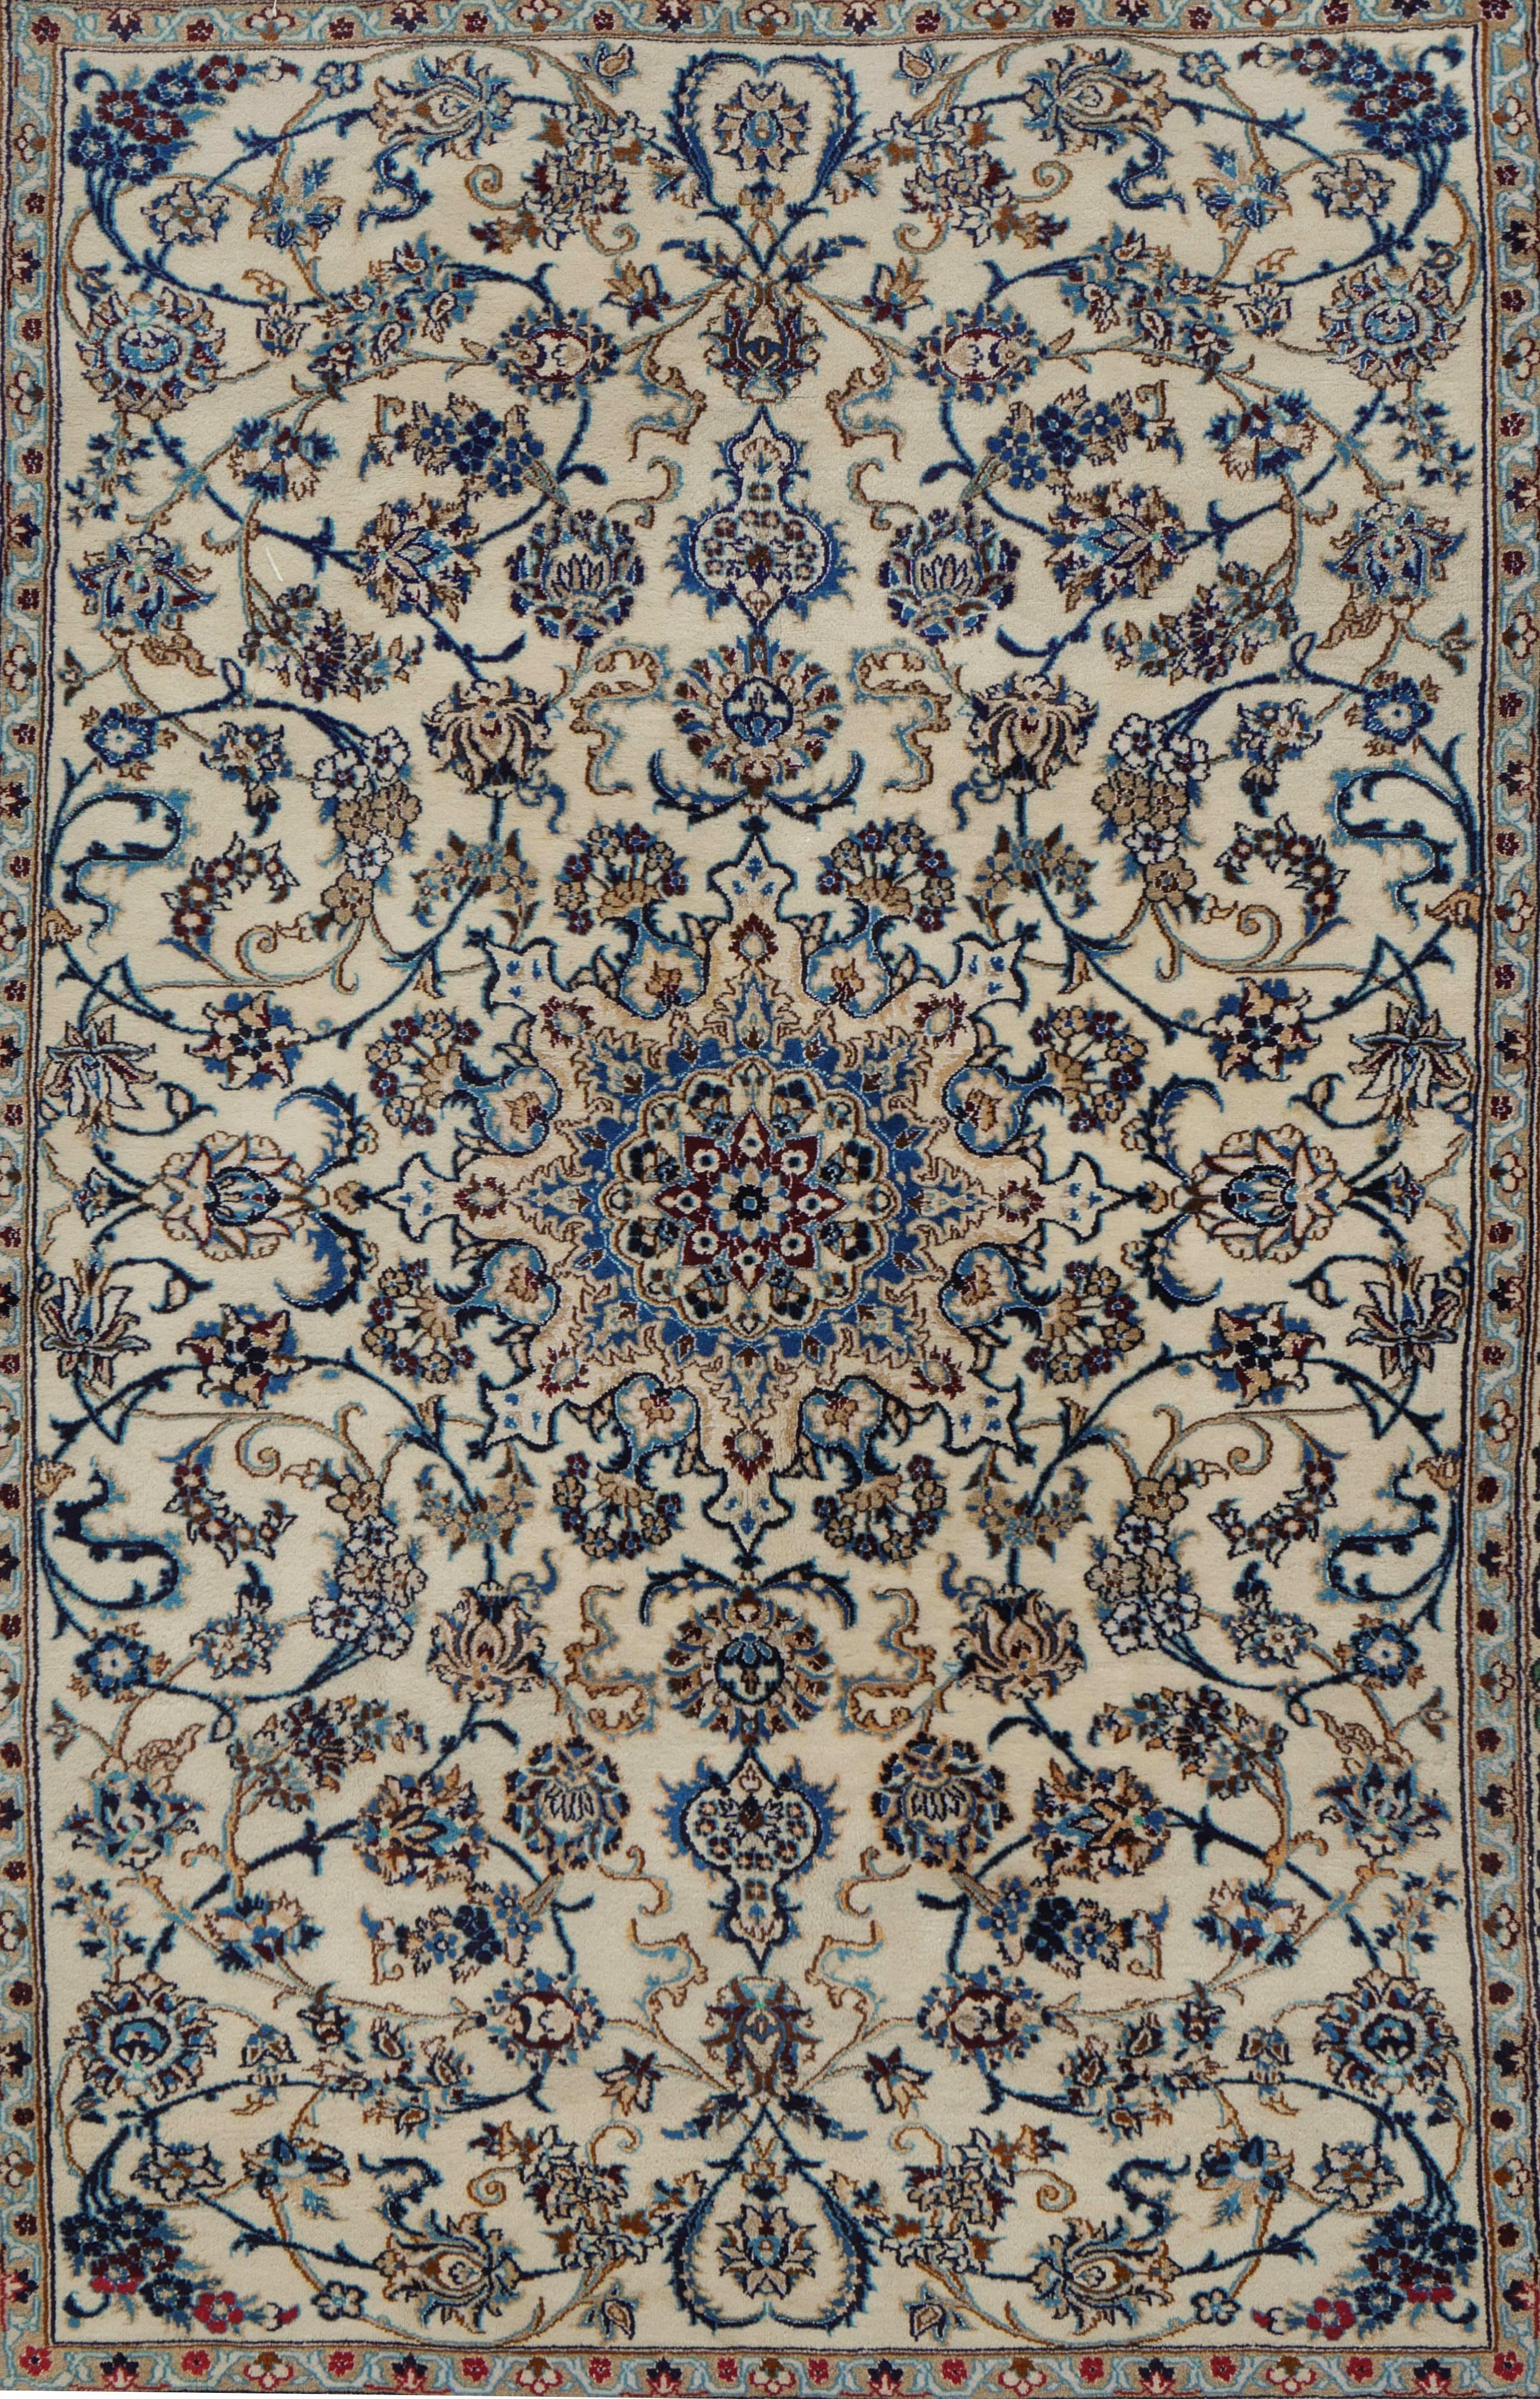 This is a large, gorgeous and authentic Persian Nain carpet in wool with finishes in silk.
Origin: Nain, Iran
Design: Medallion & Corner
Weaving type: Hand-knotted
Size: 290 x 190cm c. 9.5 by 6.2 feet
Natural: Wool/silk and organic dyes
Foundation: